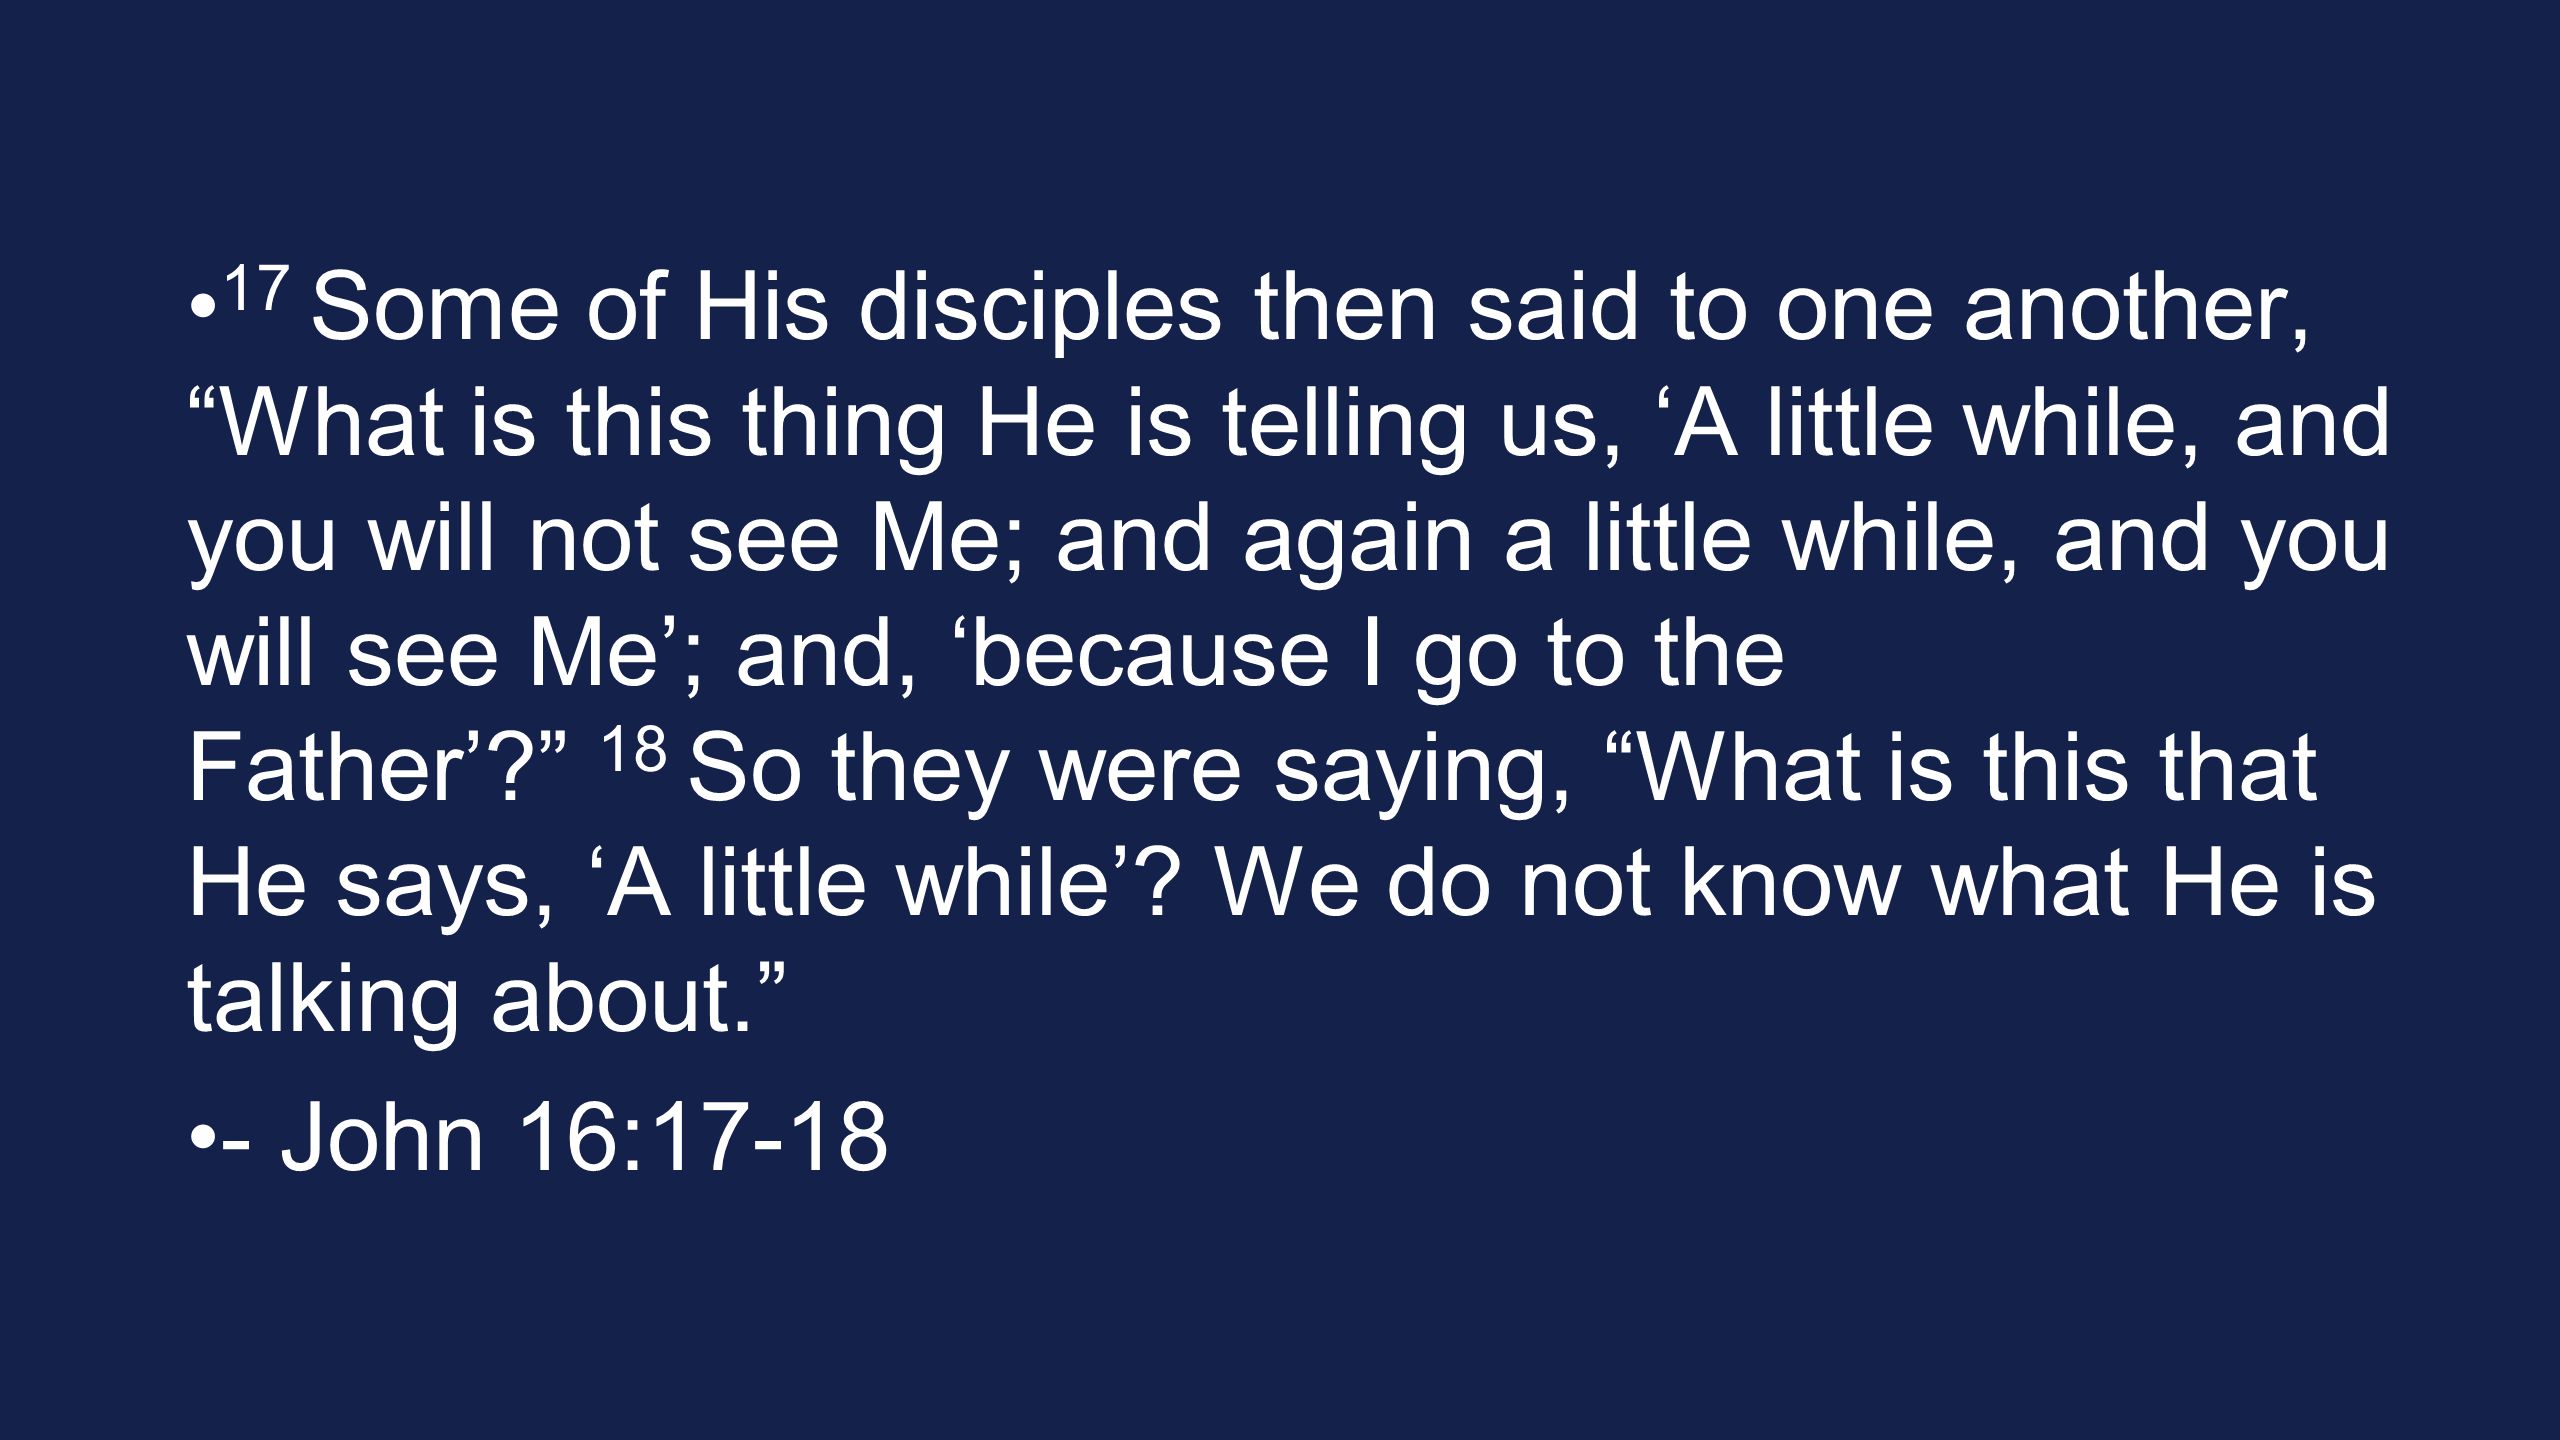 17 Some of His disciples then said to one another, What is this thing He is telling us, ‘A little while, and you will not see Me; and again a little while, and you will see Me’; and, ‘because I go to the Father’ 18 So they were saying, What is this that He says, ‘A little while’.